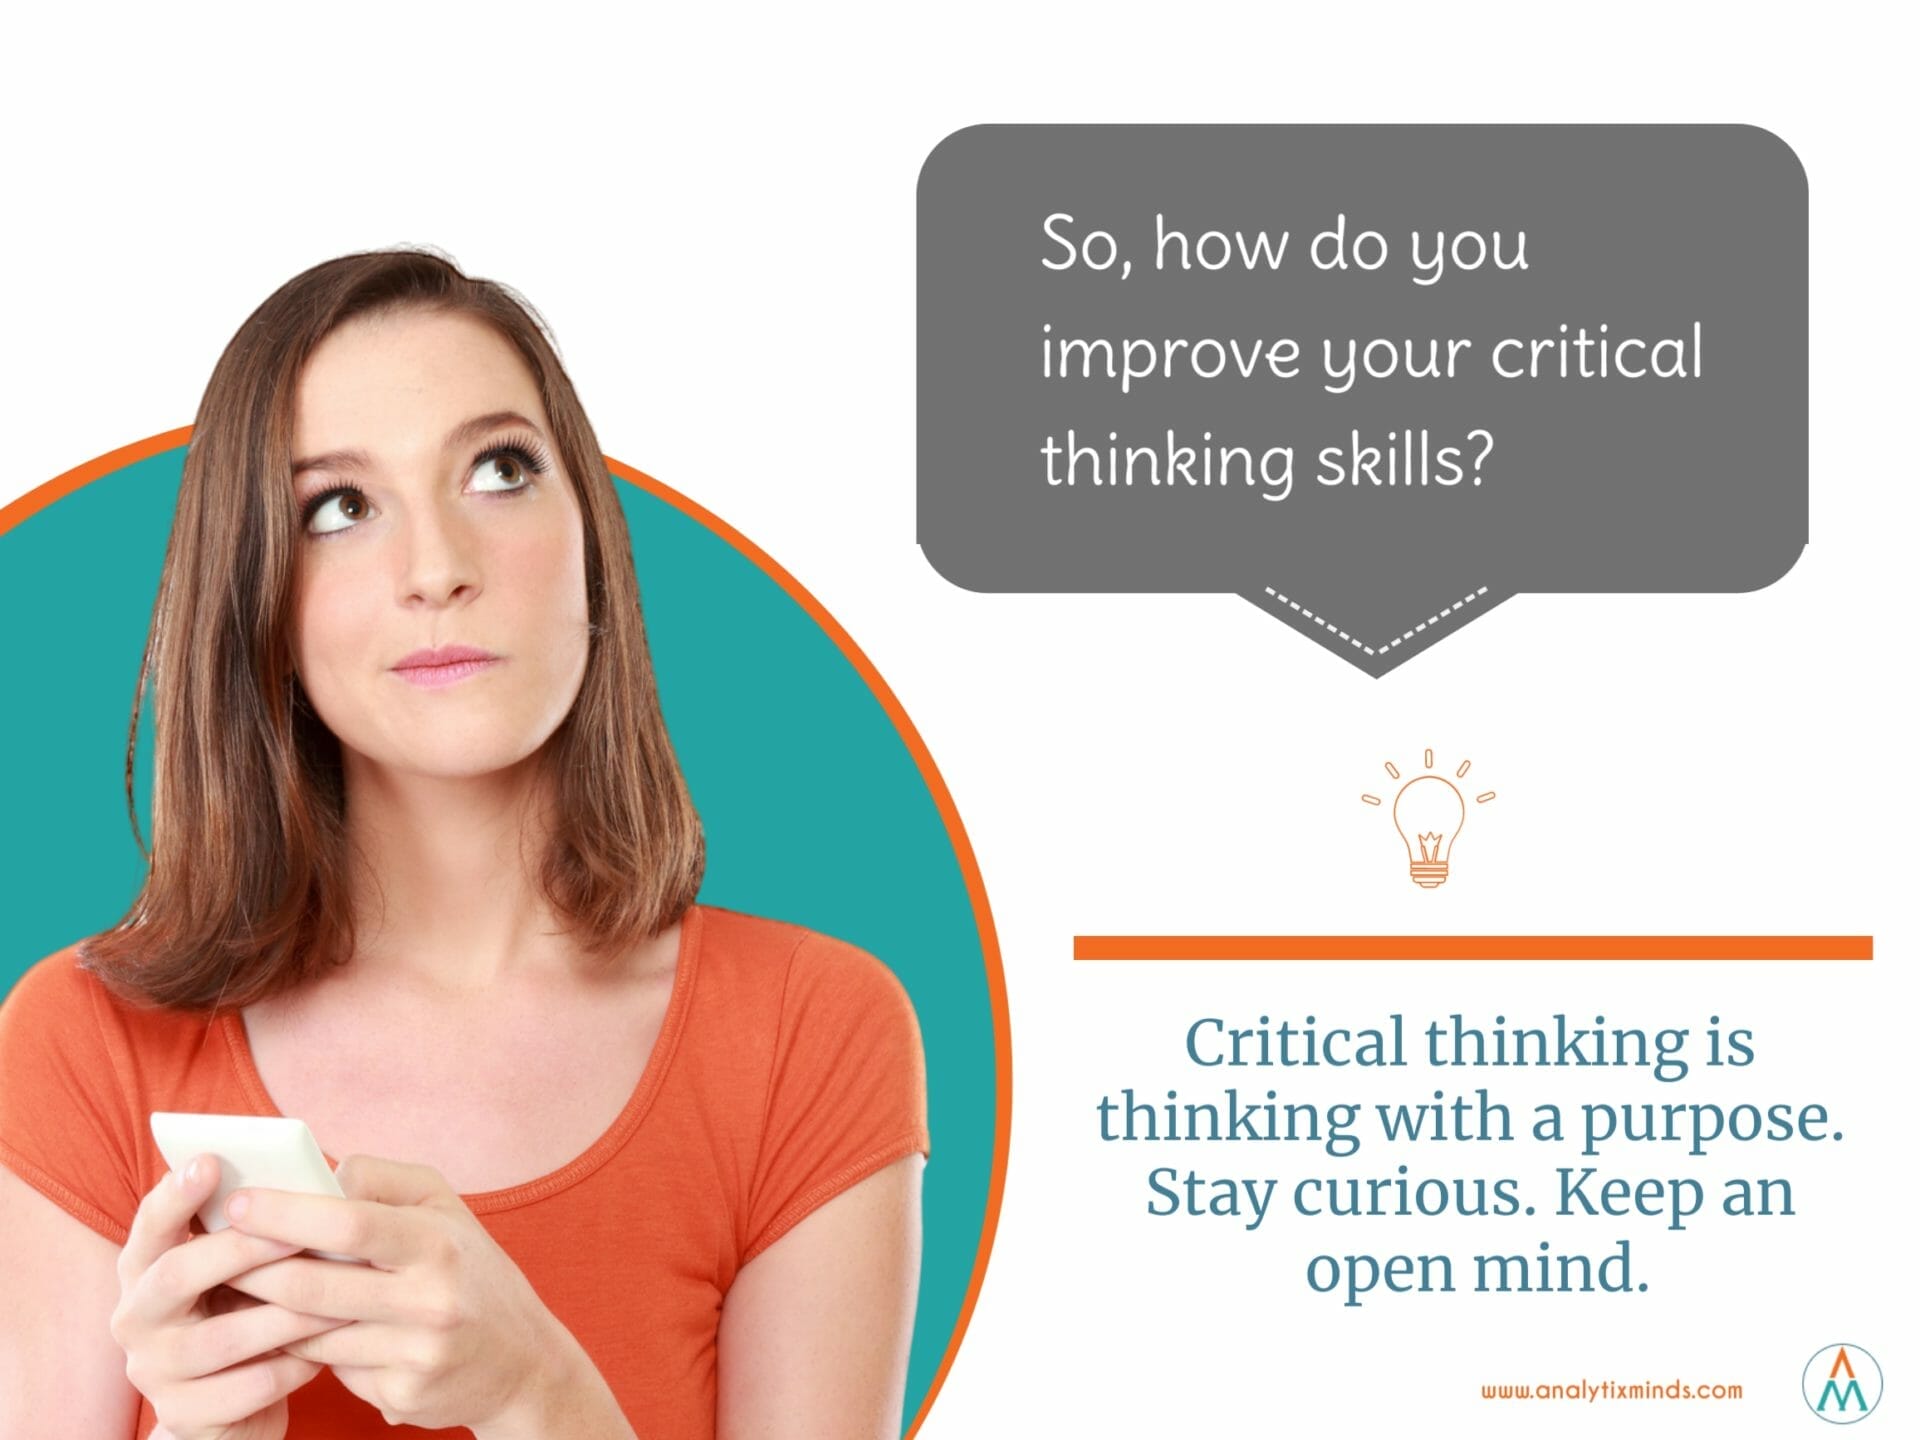 what is not recommended as a part of critical thinking